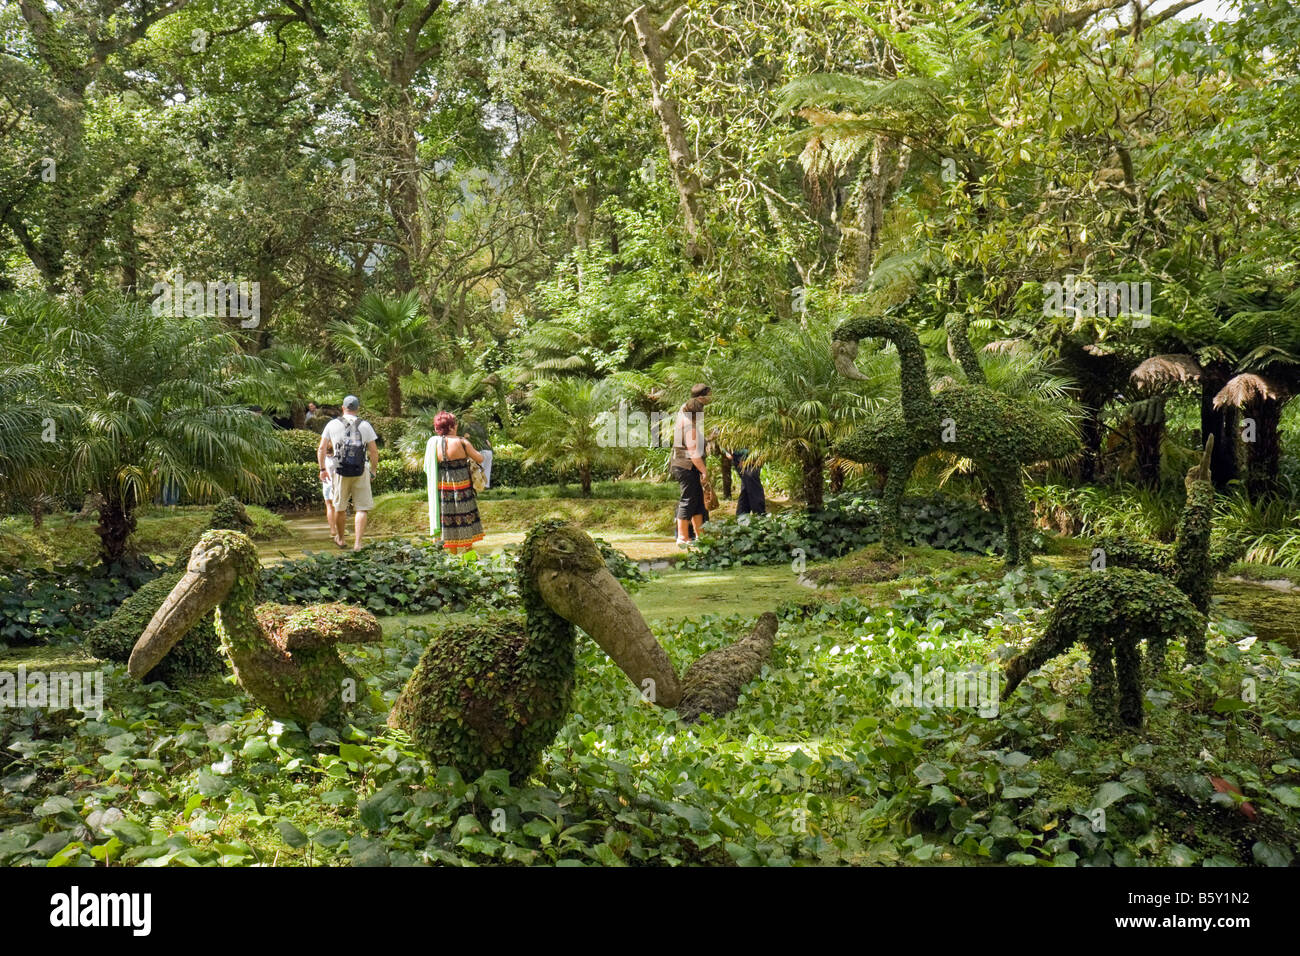 Artificial birds and tourists in the Jurassic Park part of the Terra Nostra park in Furnas, Azores, Portugal Stock Photo